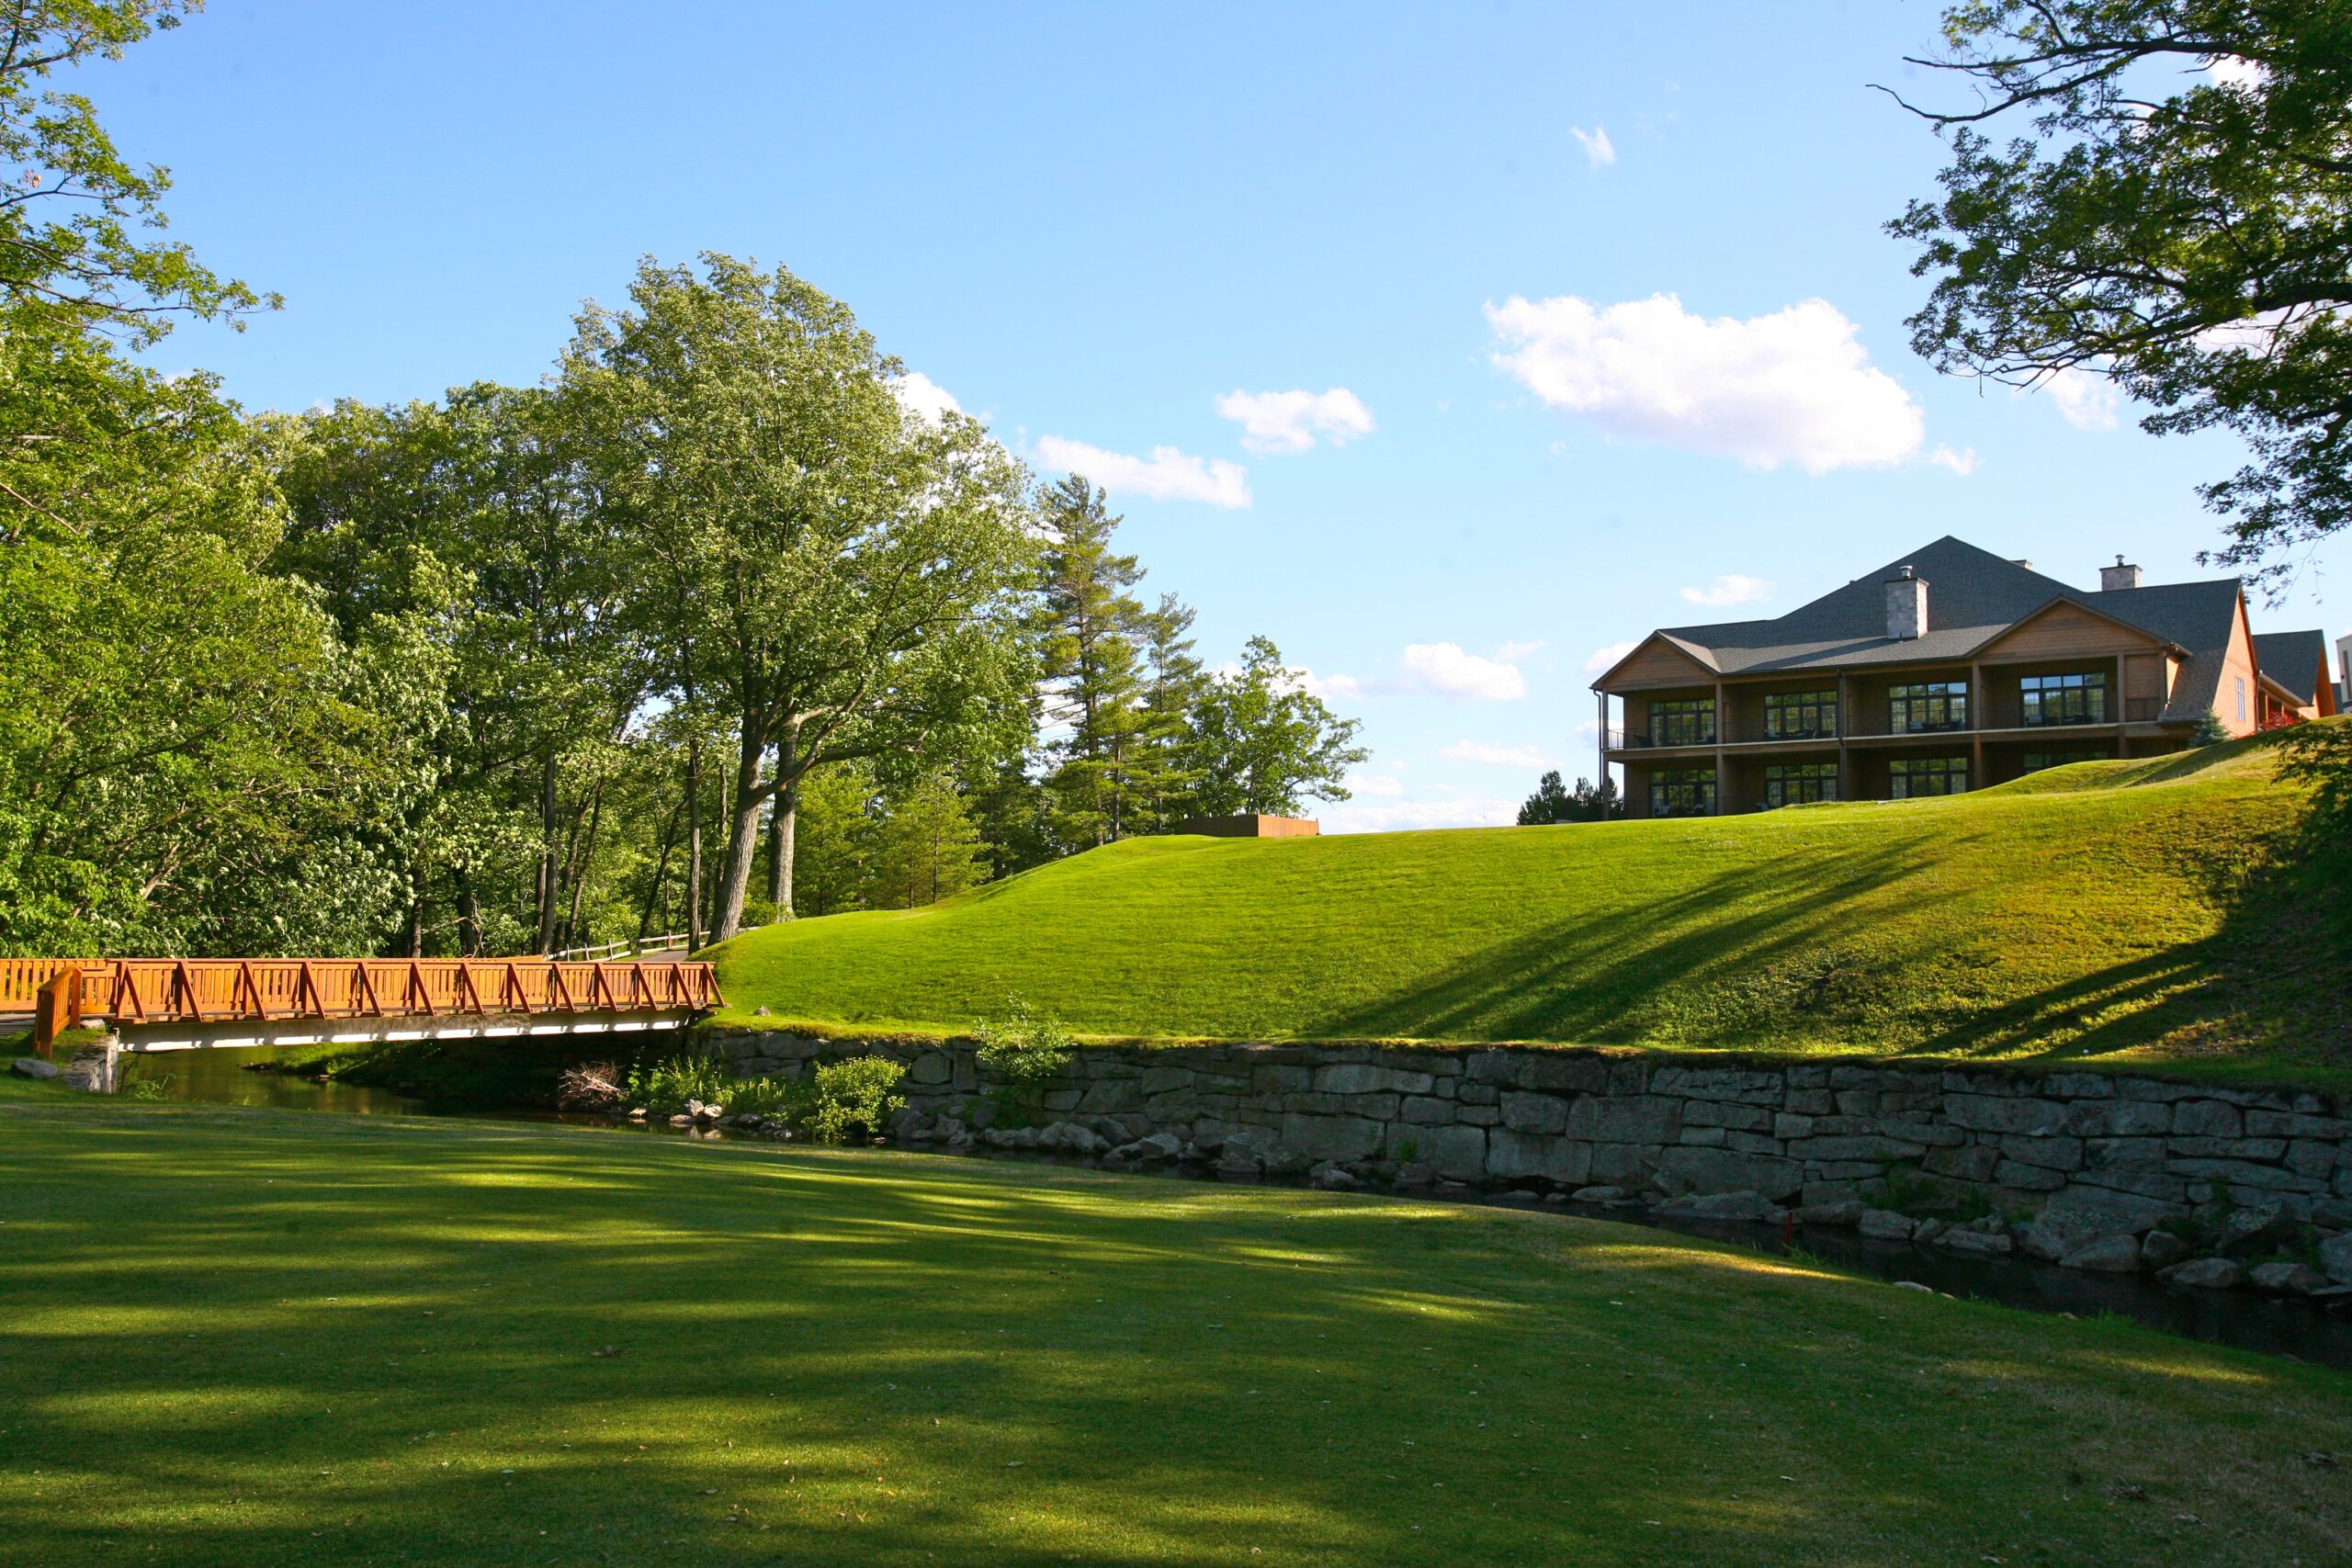 skytop lodge golf course with cabin and bridge in the background